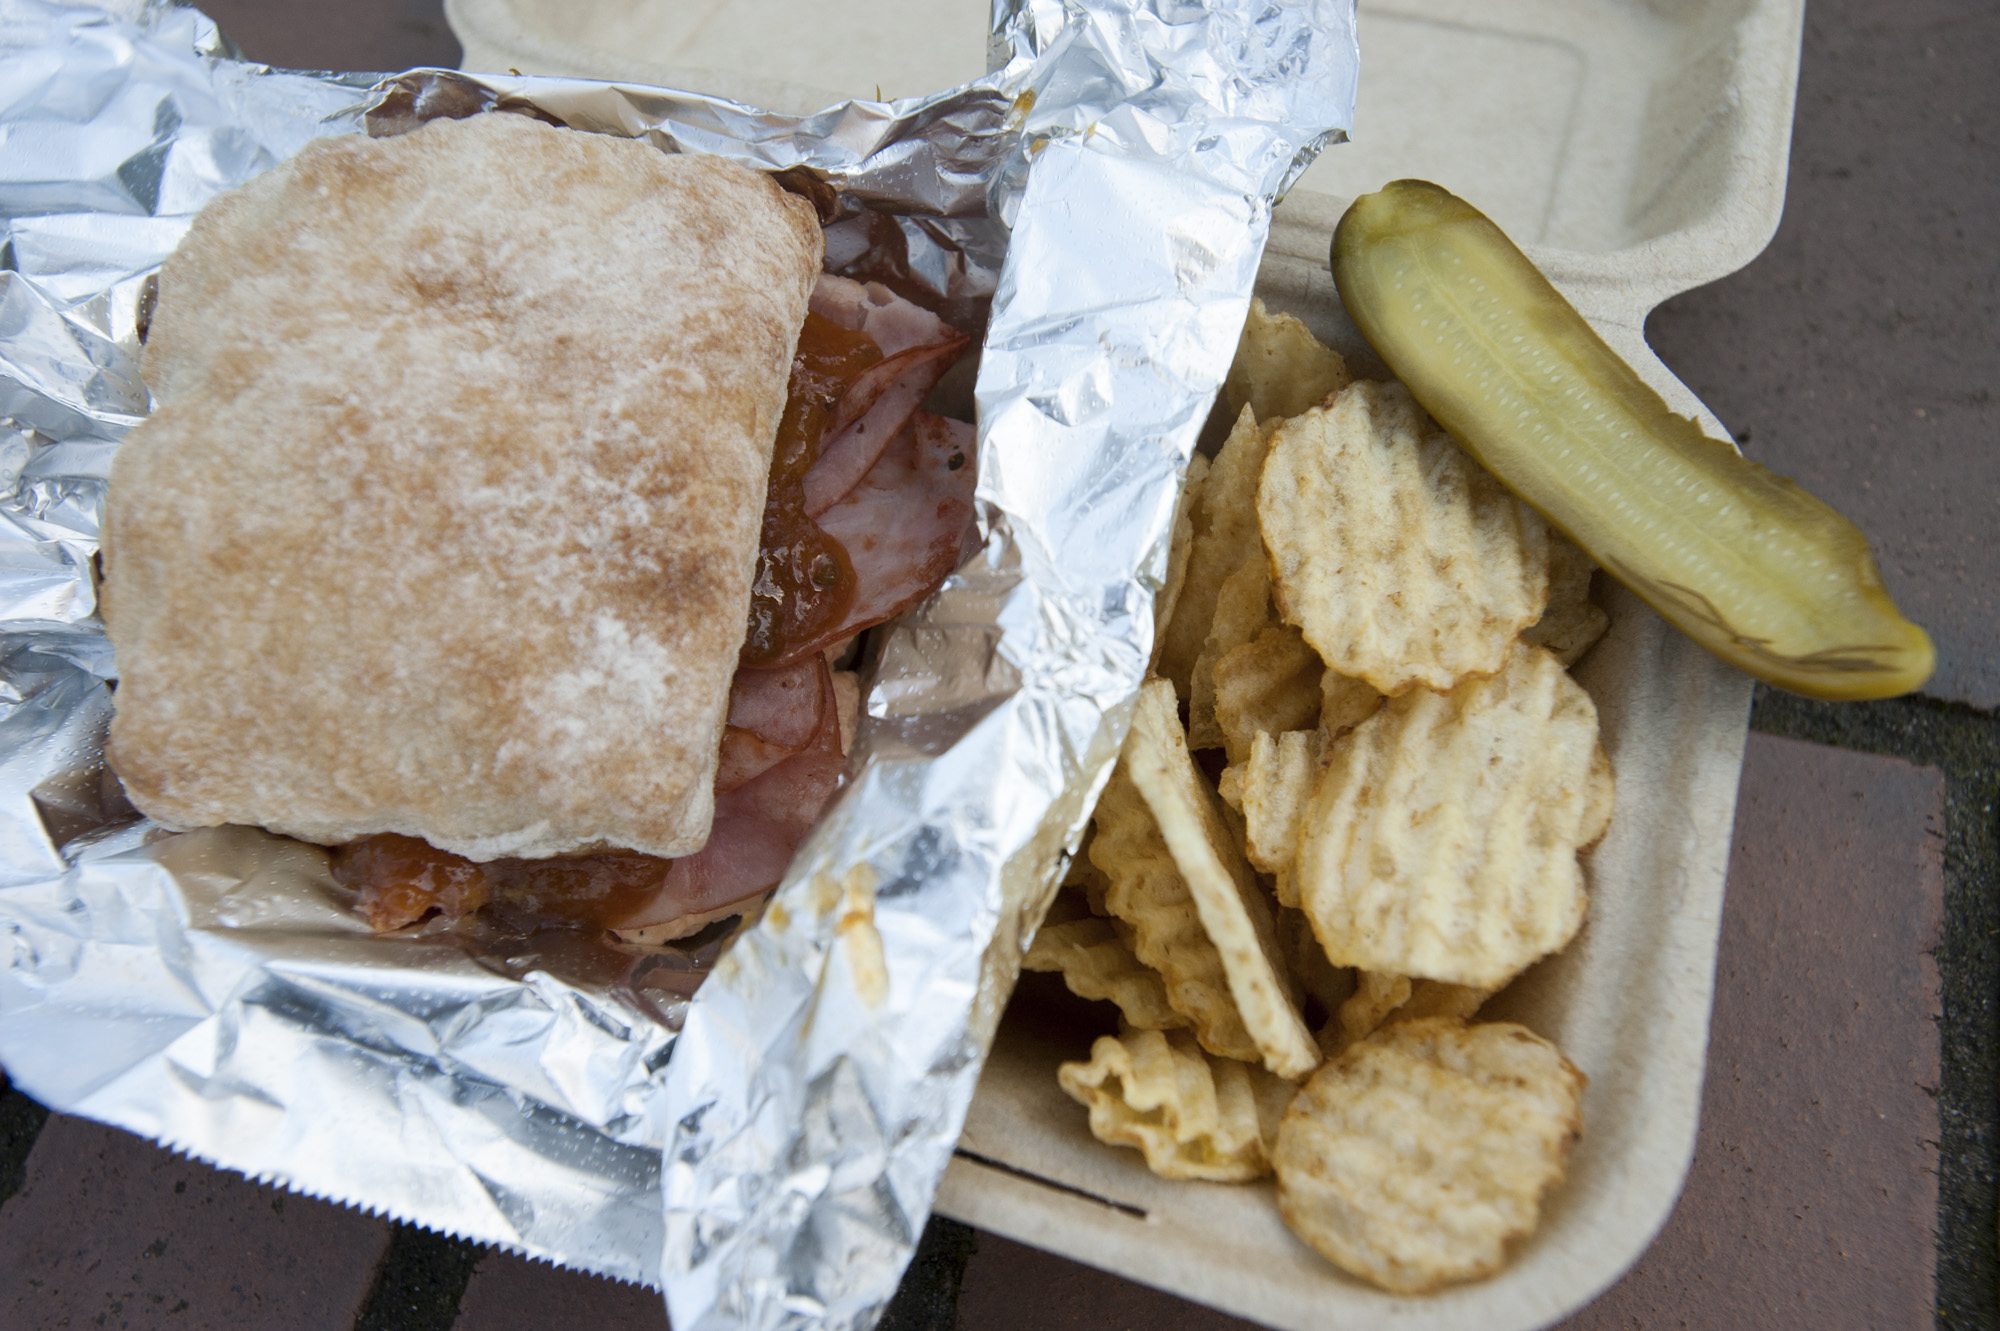 The Georgia Peach sandwich is served with chips and a pickle at the Pimento Cheese Kitchen food cart in Vancouver.